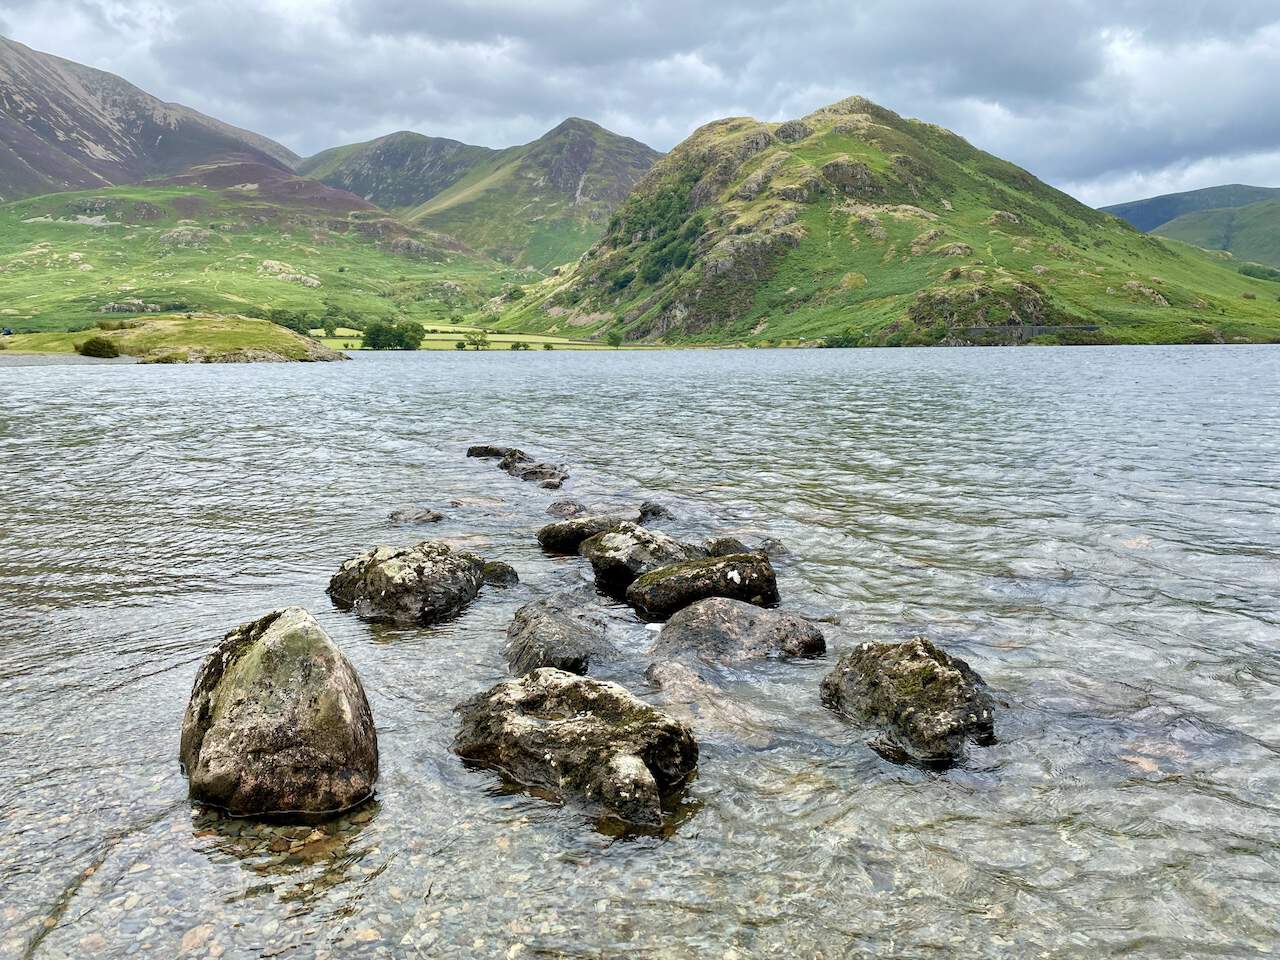 Crummock Water and Rannerdale Knotts. Whiteless Pike is the pointed fell behind Rannerdale Knotts.